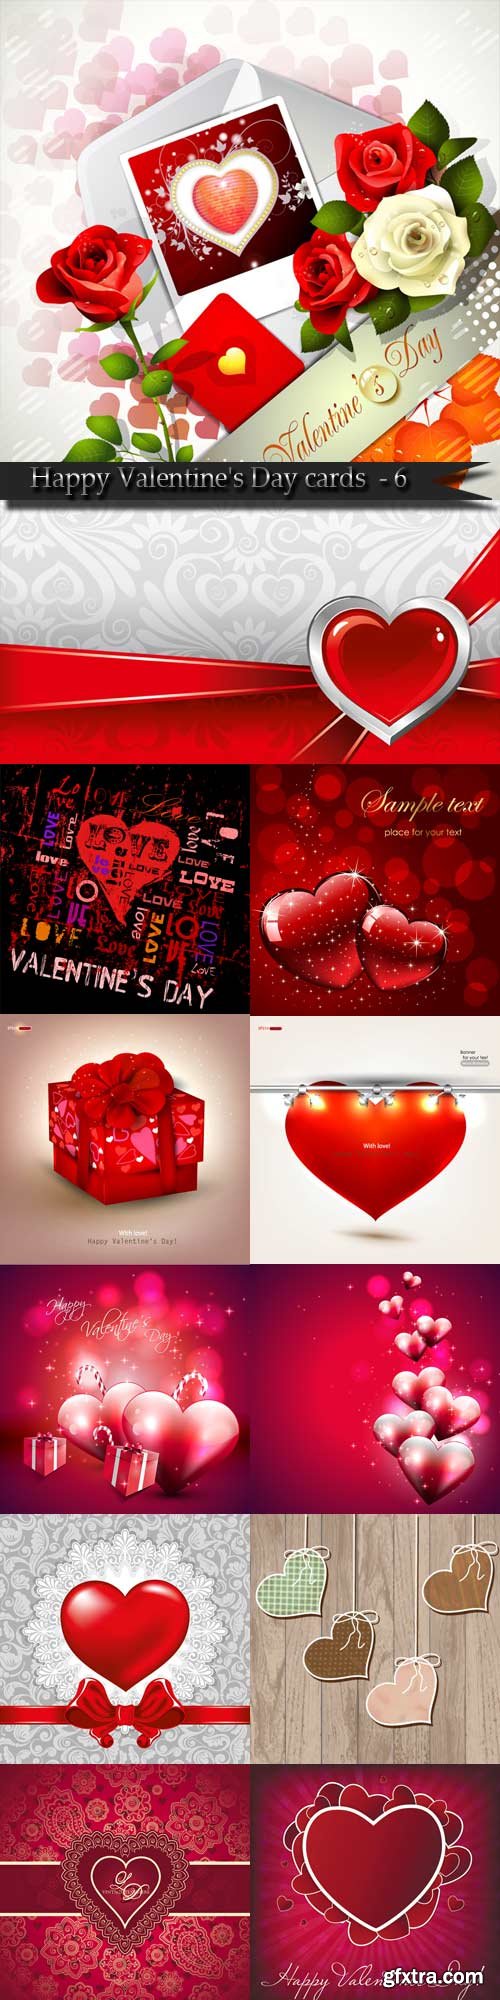 Happy Valentine\'s Day cards and backgrounds - 6